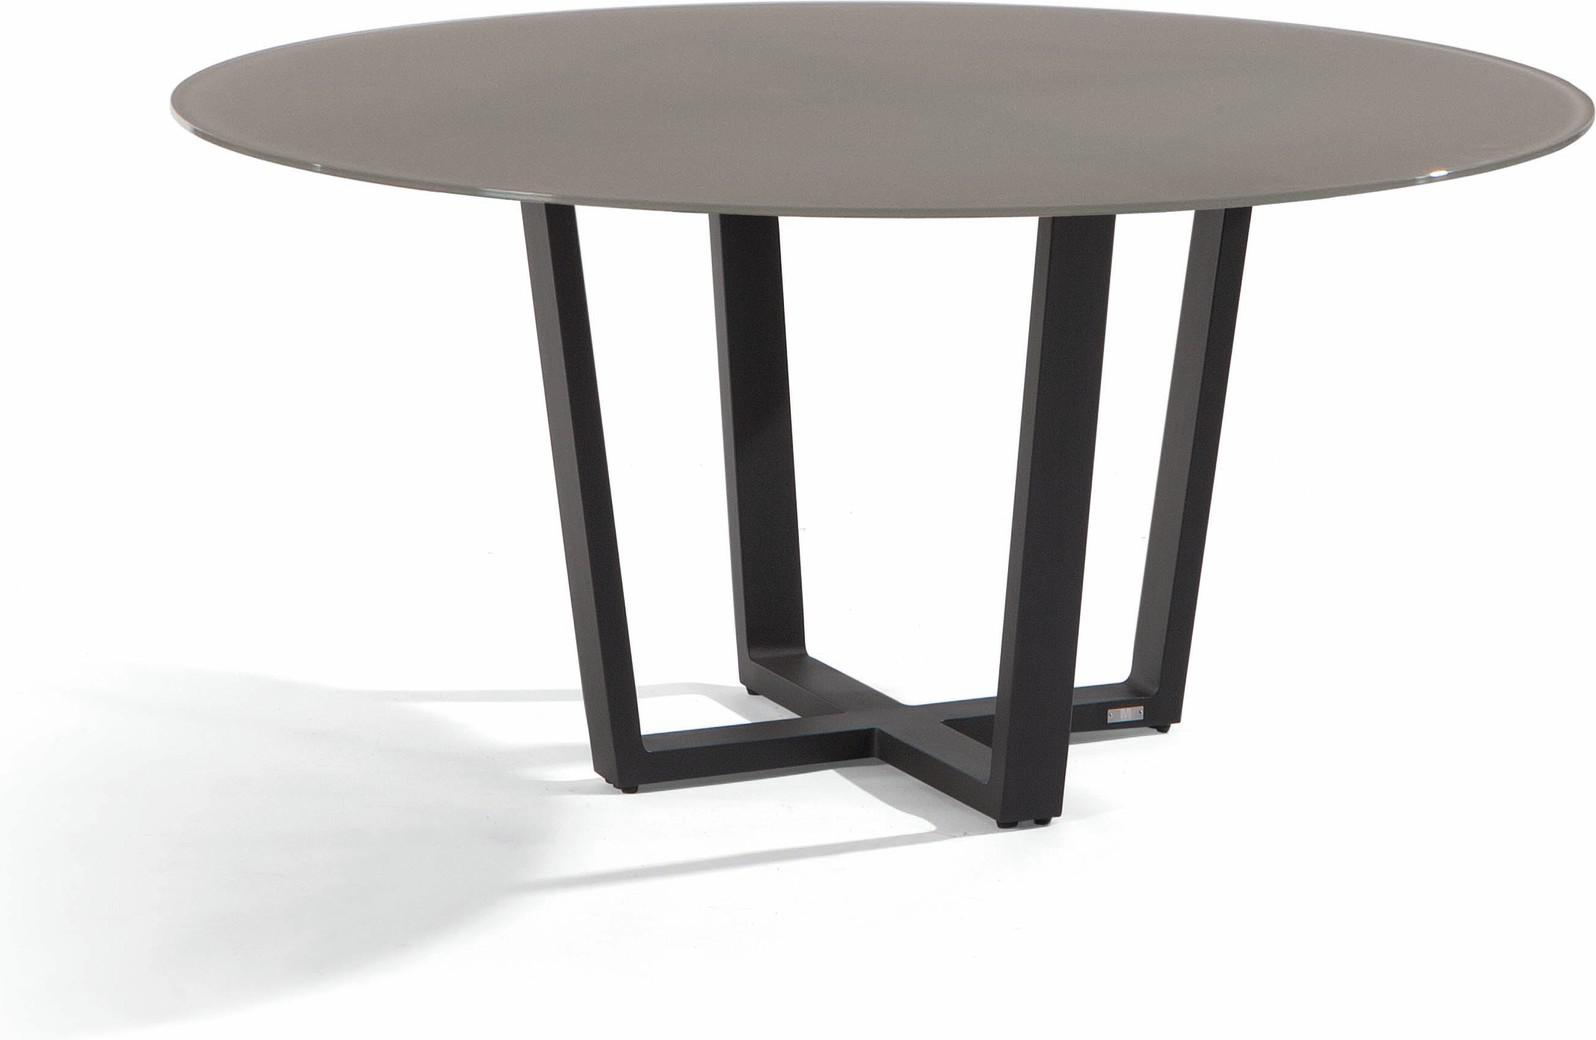 Fuse Round dining table ⌀148